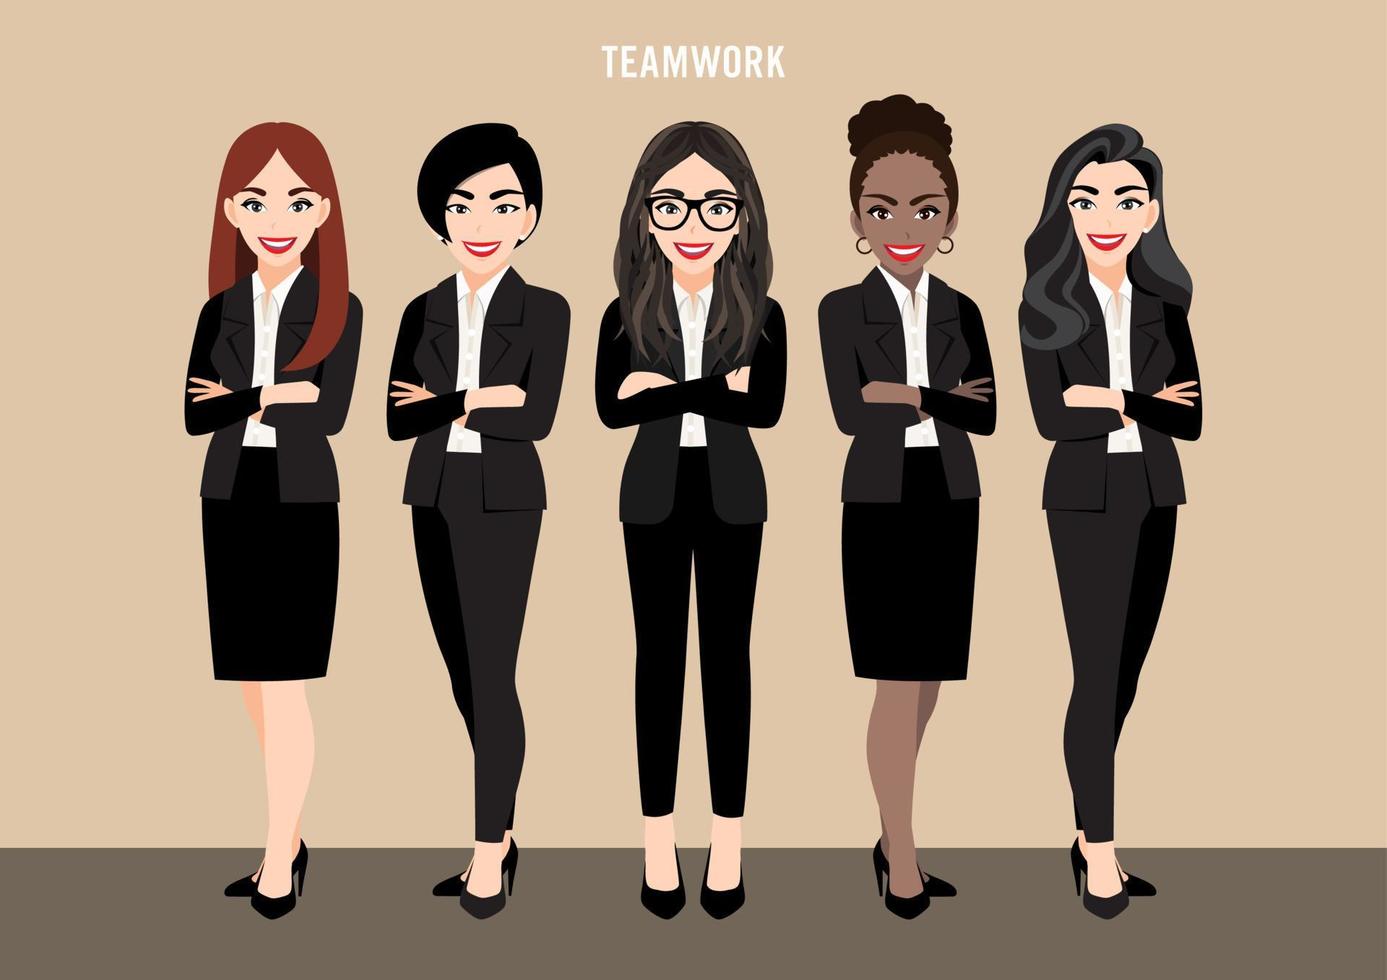 Cartoon character with business team set or leadership concept with businesswomen. Vector illustration in cartoon style.